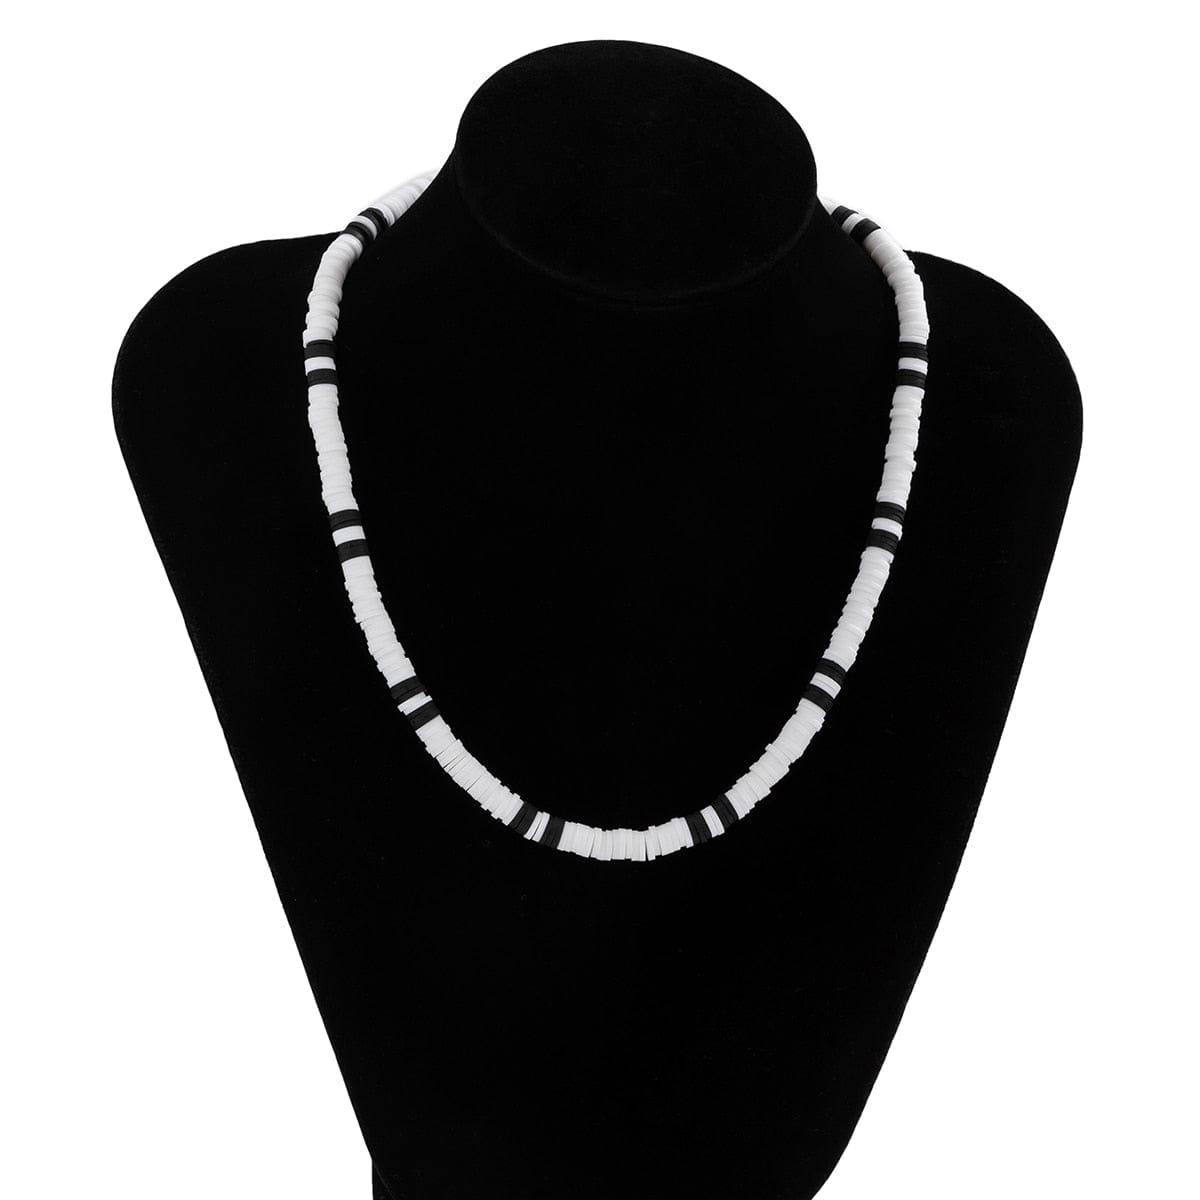 Kris stone necklace - VERSO QUALITY MATERIALS